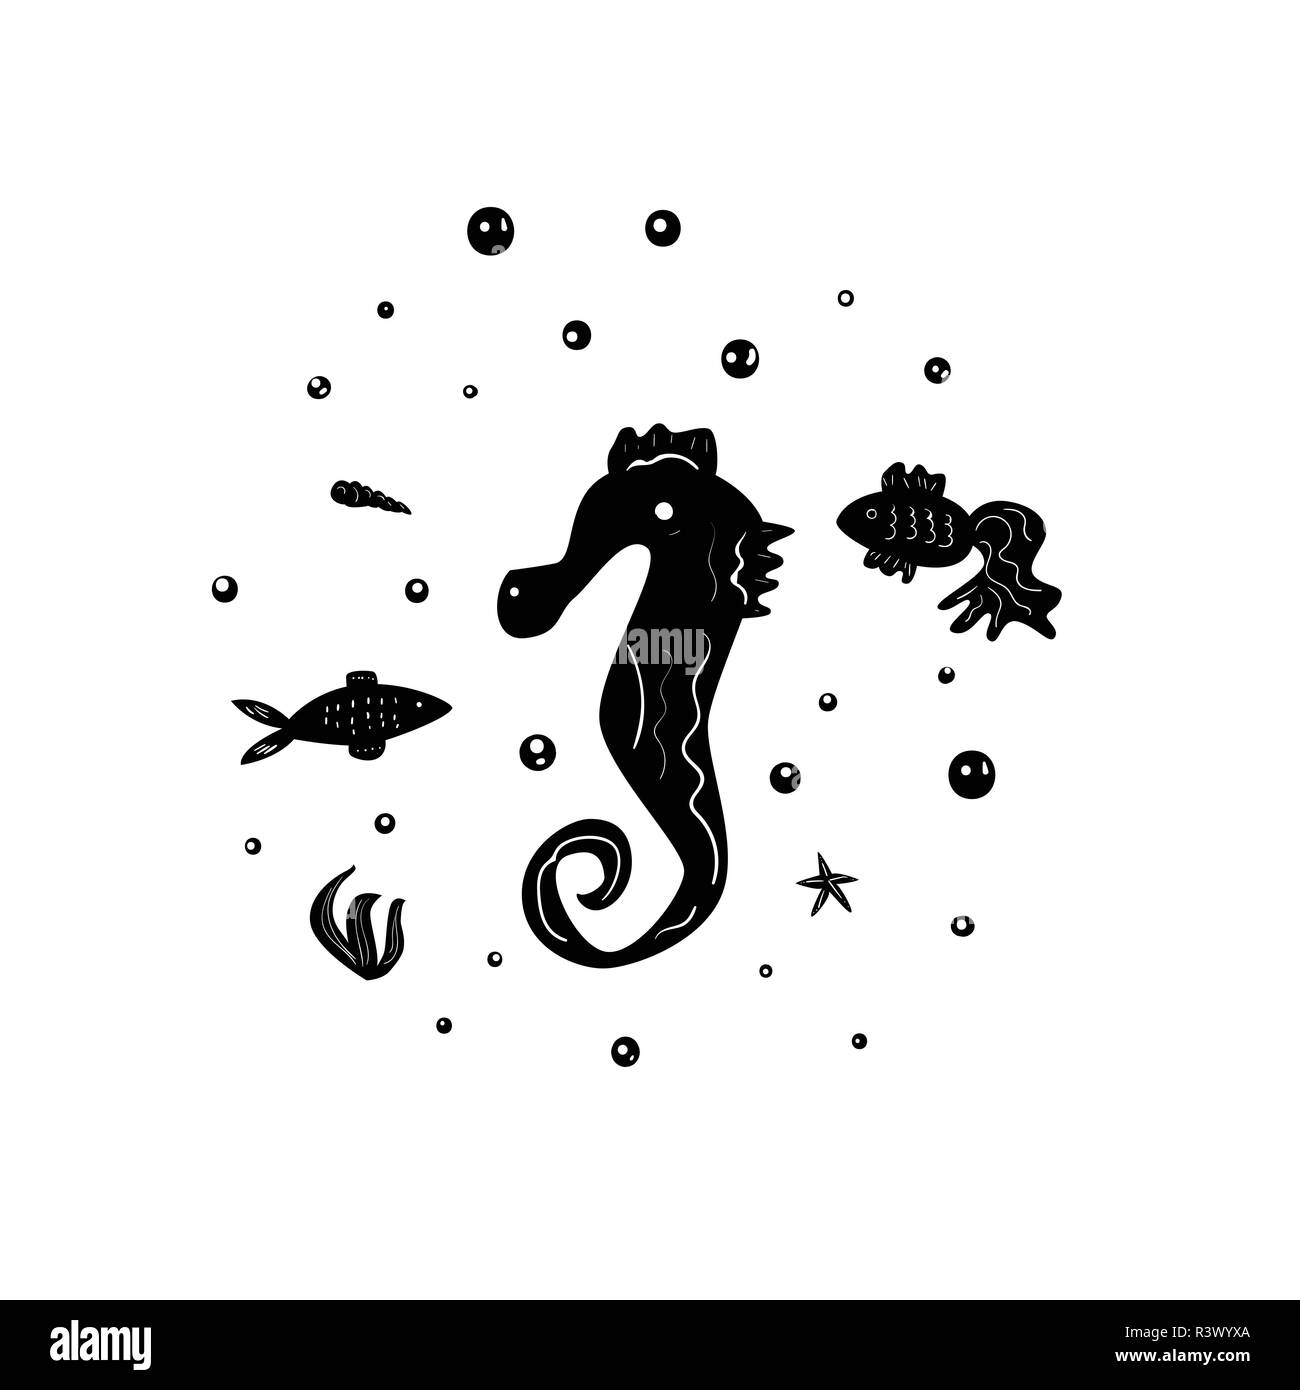 Sea silhouette composition. Seahorse and other underwater shadow-figure. Vector illustration. Stock Vector